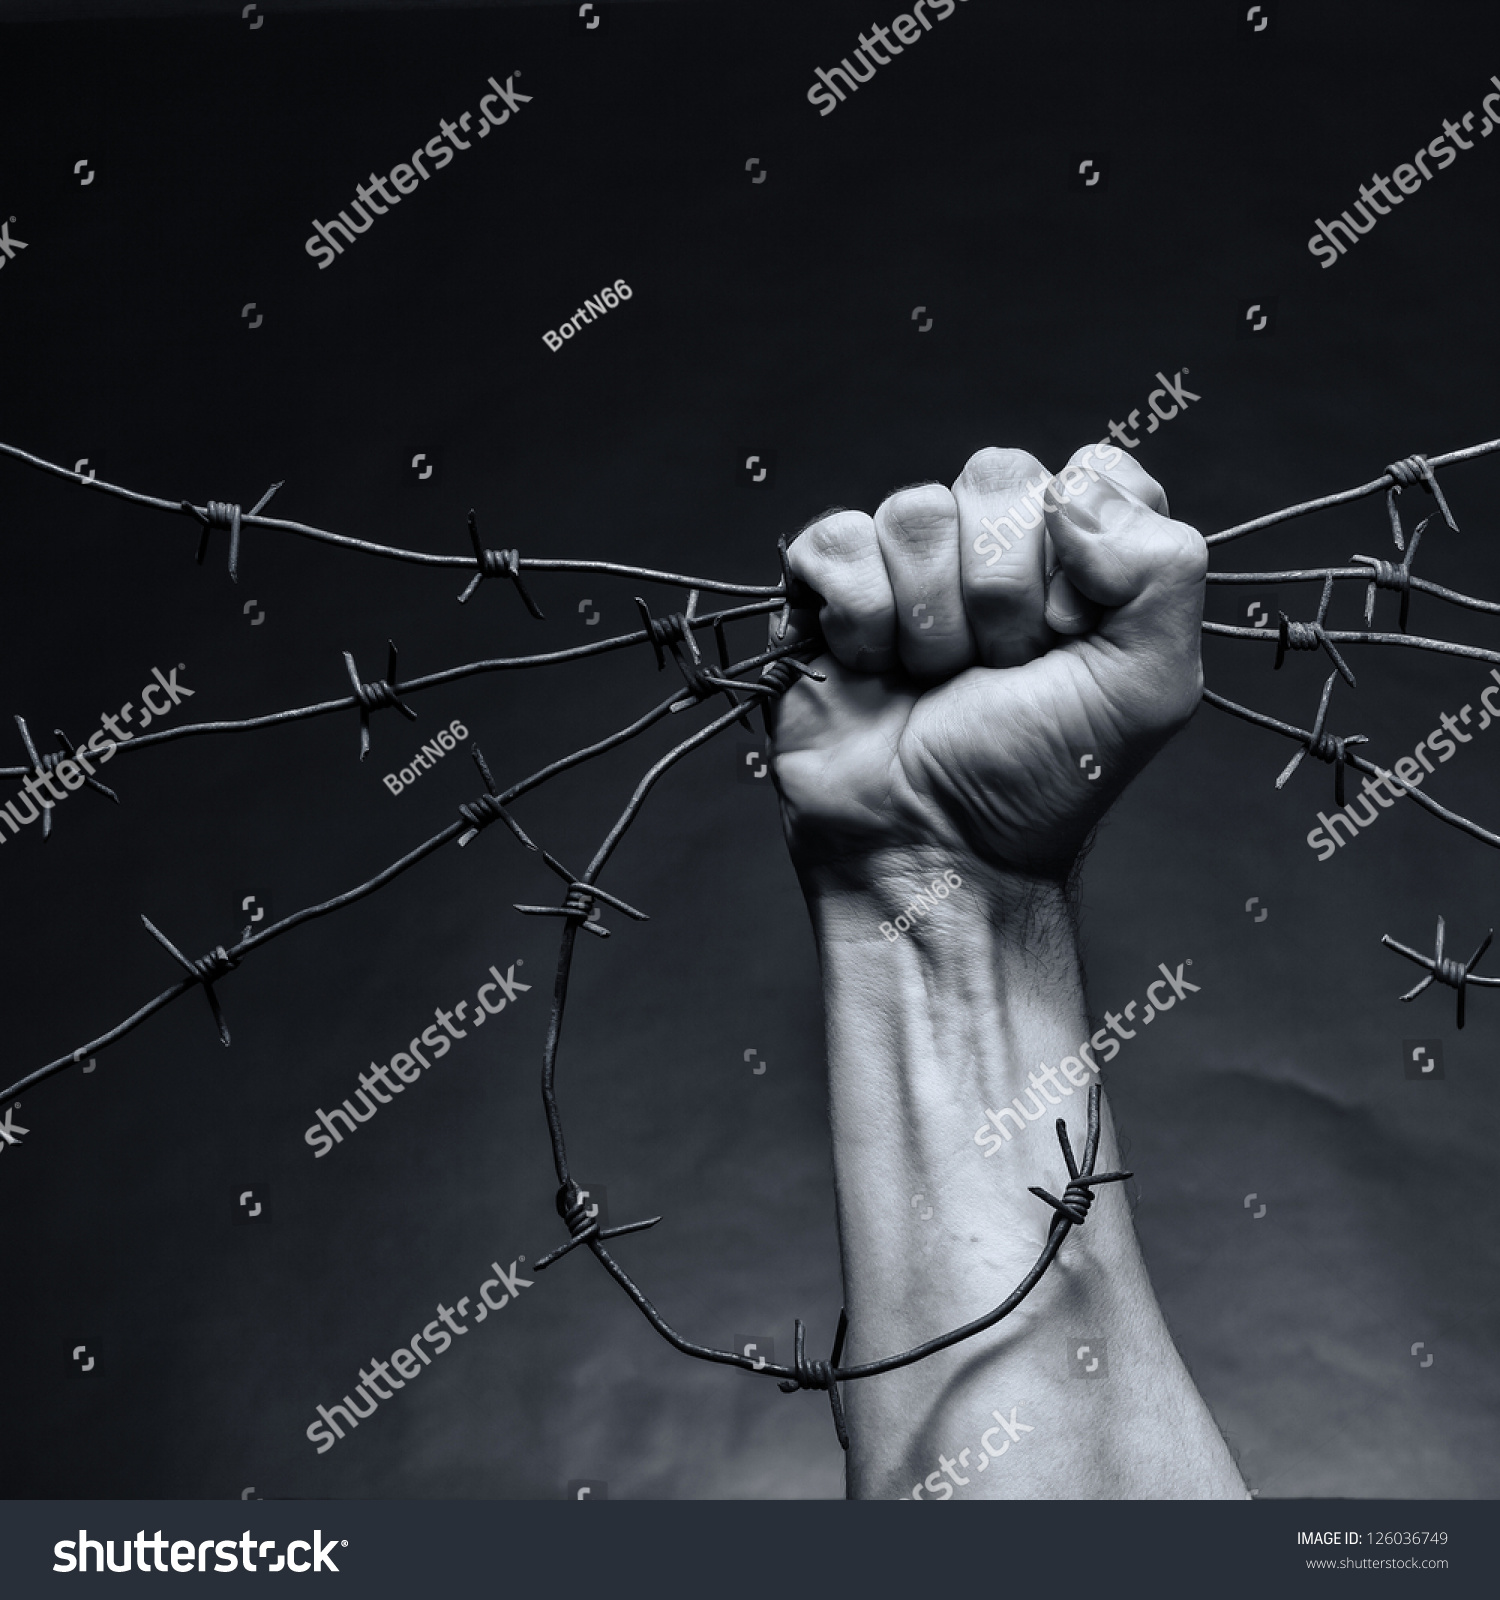 Rusty barbed wire in a strong man's hand #126036749